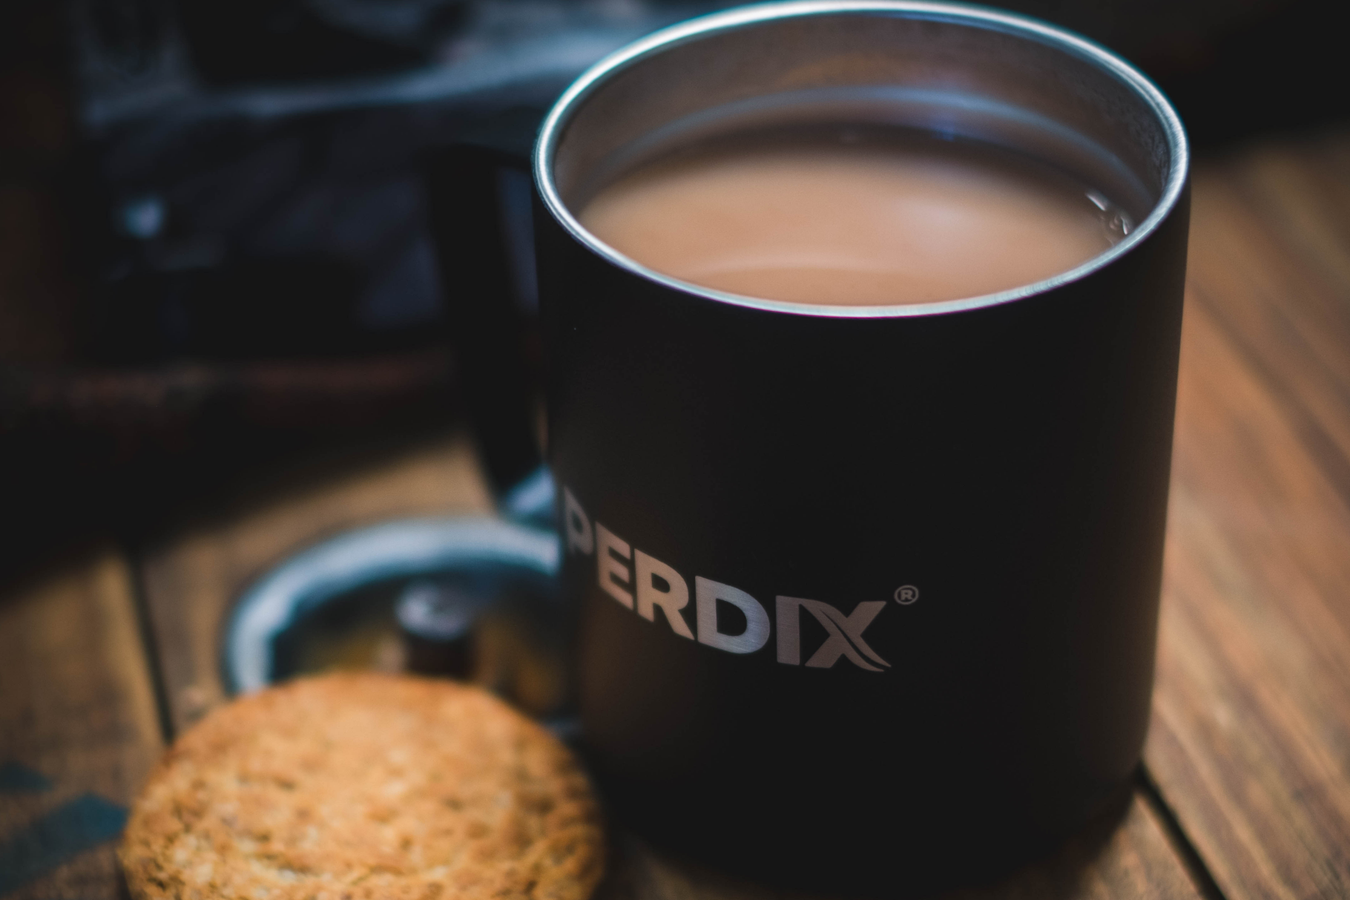 PERDIX branded insulated cups. High quality Miir cups with PERDIX log - Show fellow wildlife professionals you use a quality outfitter for your wildlife equipment.